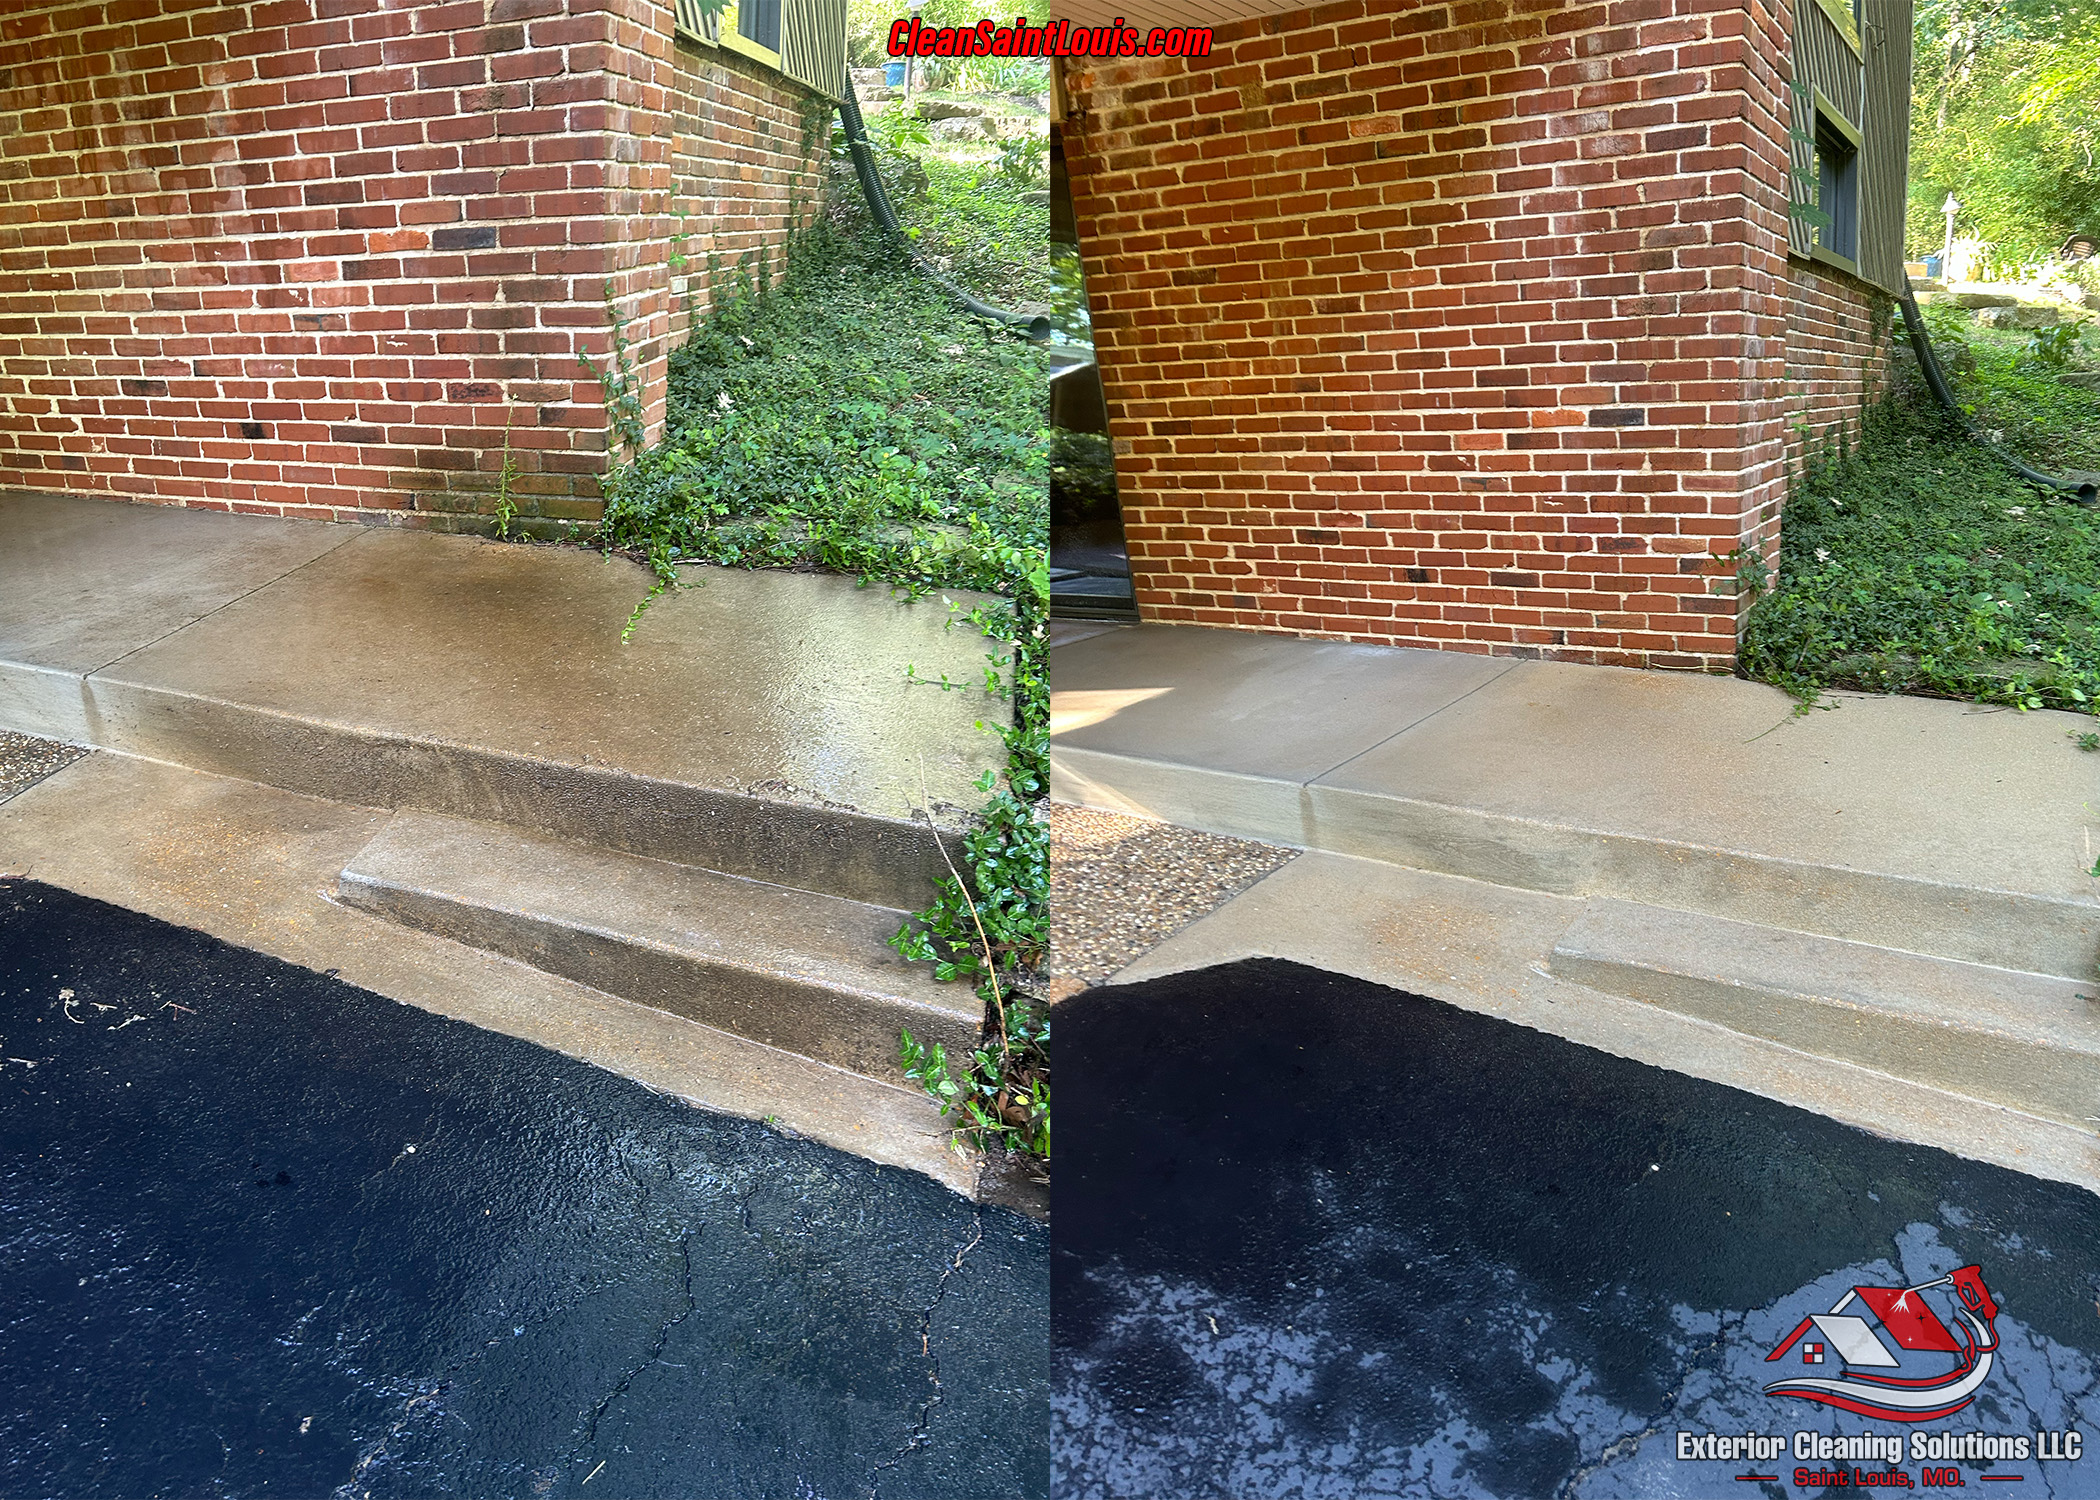 Trusted Concrete Cleaning in Kirkwood, MO.